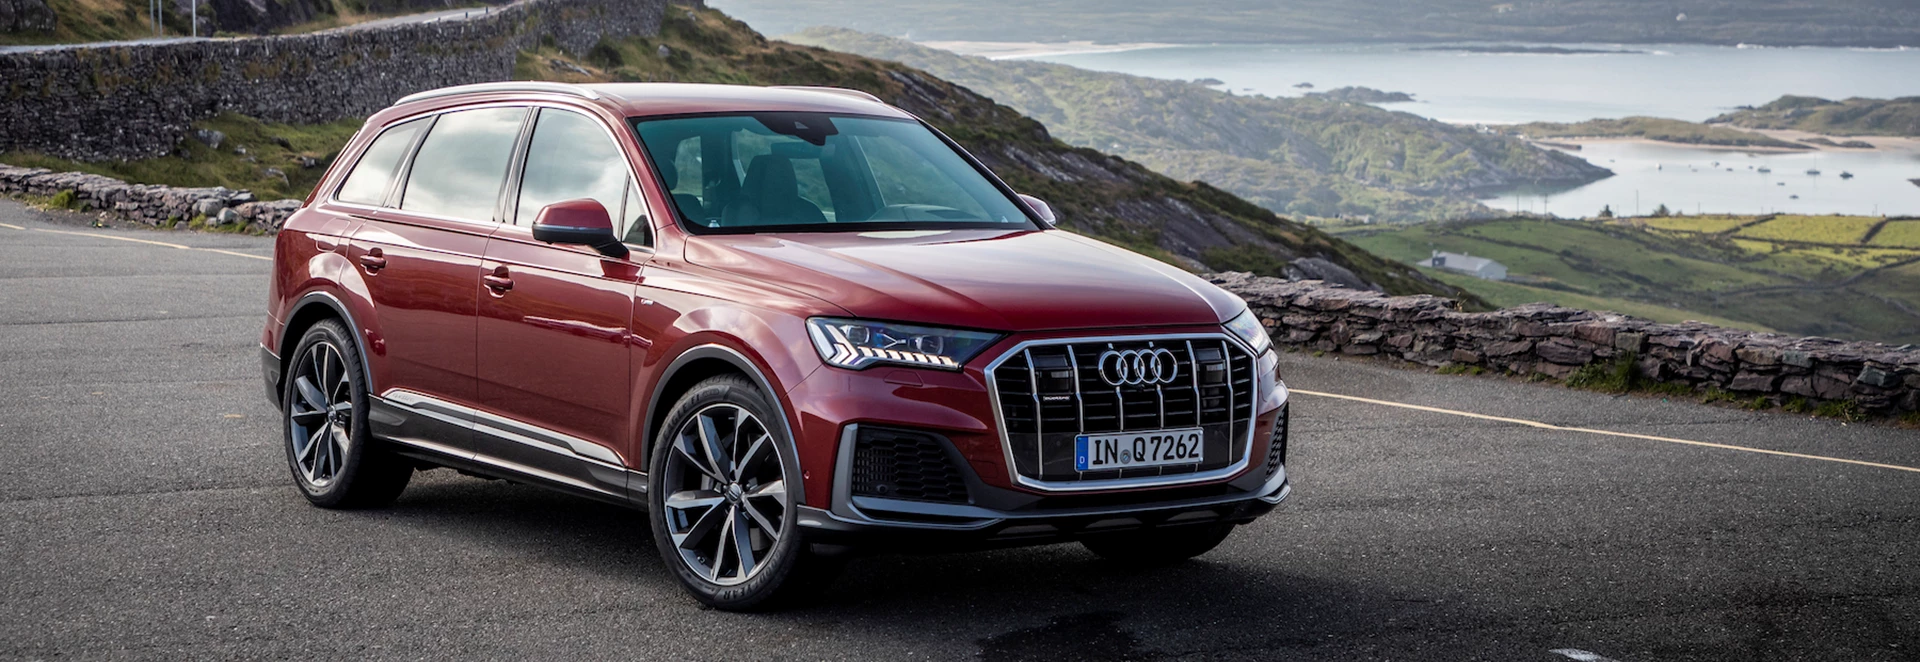 Buyer’s guide to the Audi Q7